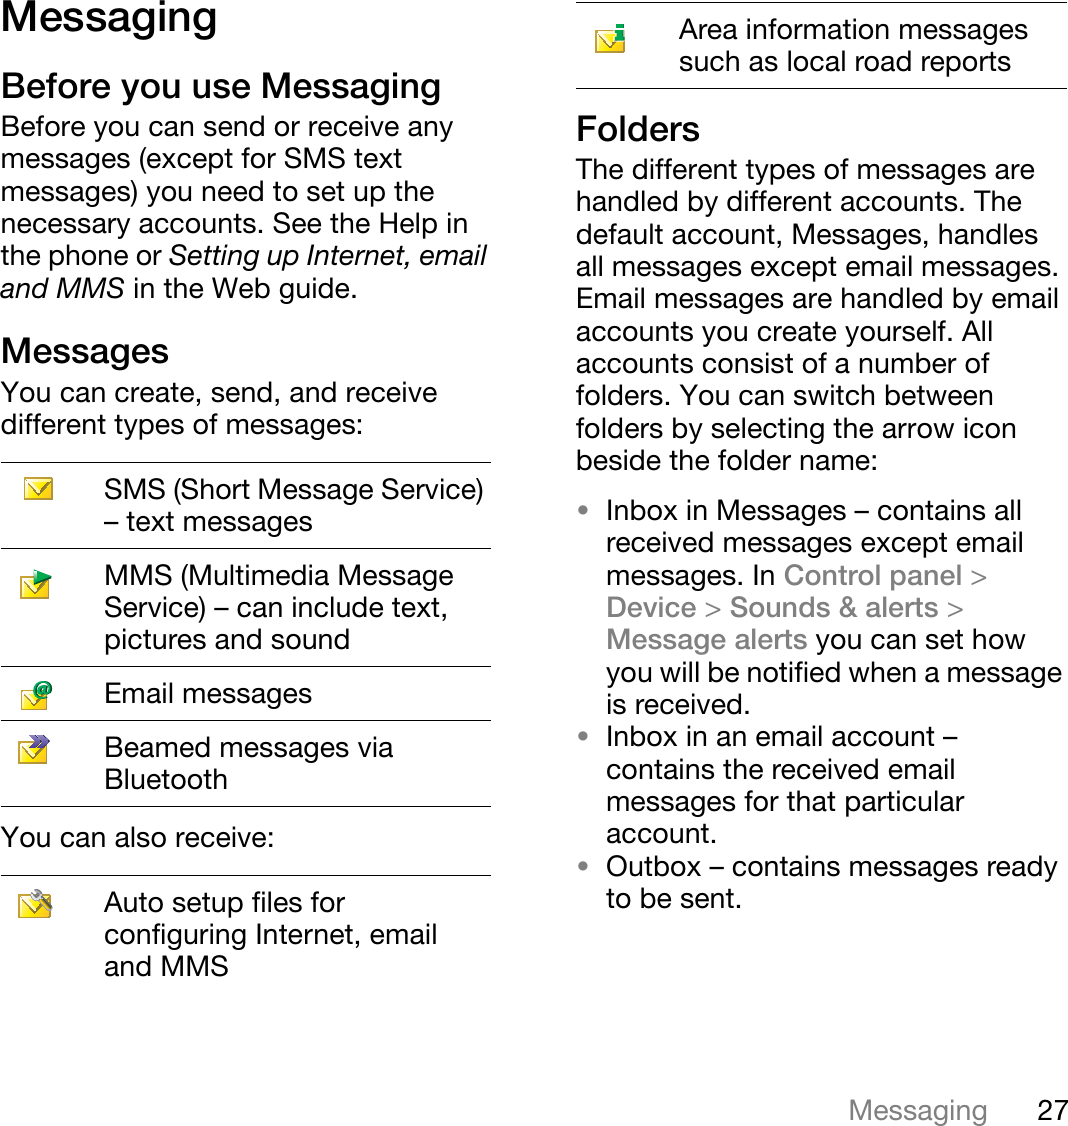 27MessagingThis is the Internet version of the user&apos;s guide. © Print only for private use.MessagingBefore you use MessagingBefore you can send or receive any messages (except for SMS text messages) you need to set up the necessary accounts. See the Help in the phone or Setting up Internet, email and MMS in the Web guide.MessagesYou can create, send, and receive different types of messages:You can also receive:FoldersThe different types of messages are handled by different accounts. The default account, Messages, handles all messages except email messages. Email messages are handled by email accounts you create yourself. All accounts consist of a number of folders. You can switch between folders by selecting the arrow icon beside the folder name:•Inbox in Messages – contains all received messages except email messages. In Control panel &gt;Device &gt;Sounds &amp; alerts &gt;Message alerts you can set how you will be notified when a message is received.•Inbox in an email account – contains the received email messages for that particular account.•Outbox – contains messages ready to be sent.SMS (Short Message Service) – text messagesMMS (Multimedia Message Service) – can include text, pictures and soundEmail messagesBeamed messages via BluetoothAuto setup files for configuring Internet, email and MMSArea information messages such as local road reports